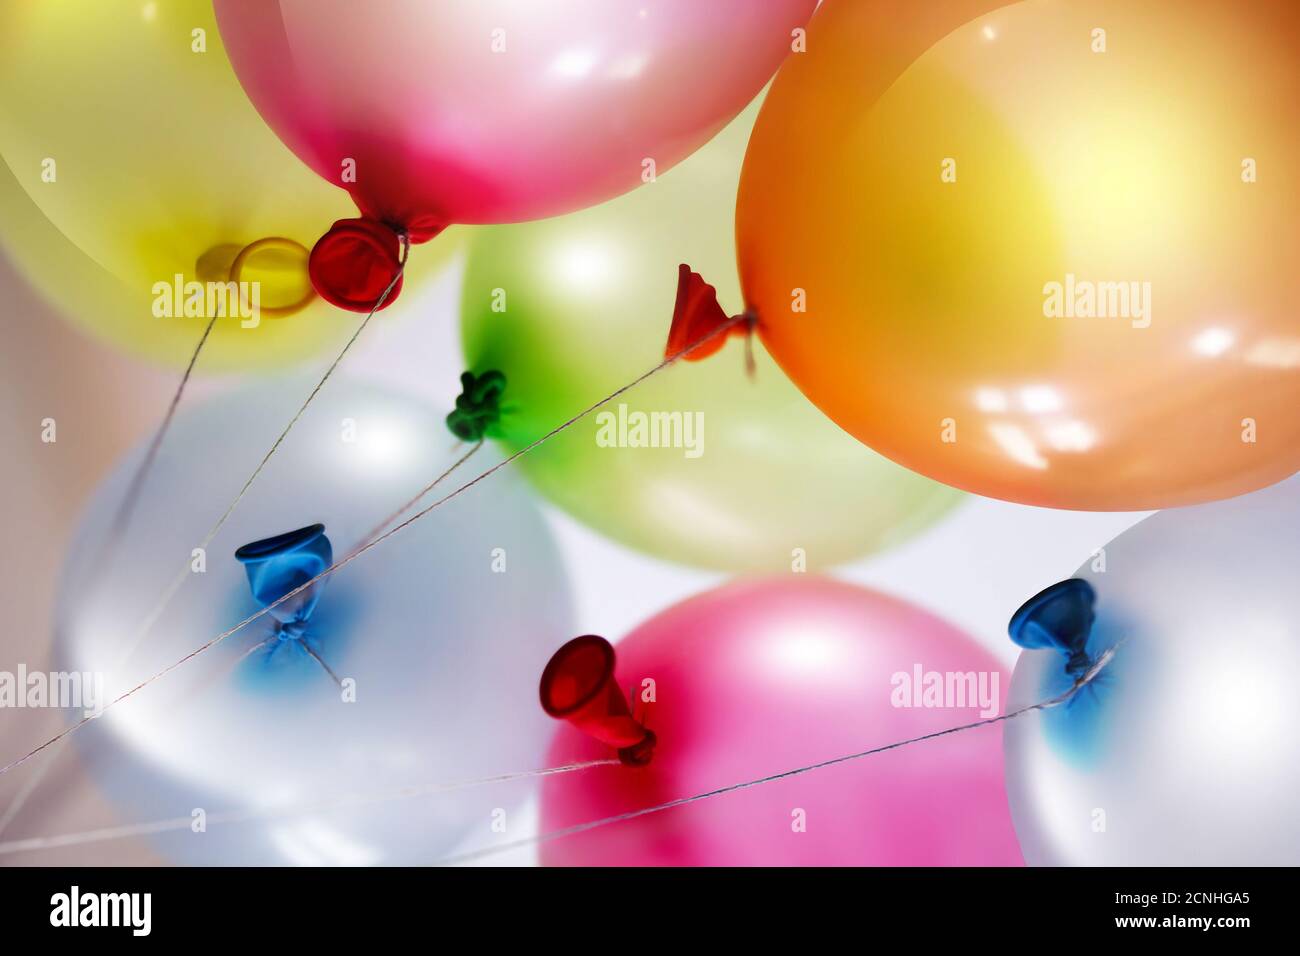 bright colored balloons Stock Photo